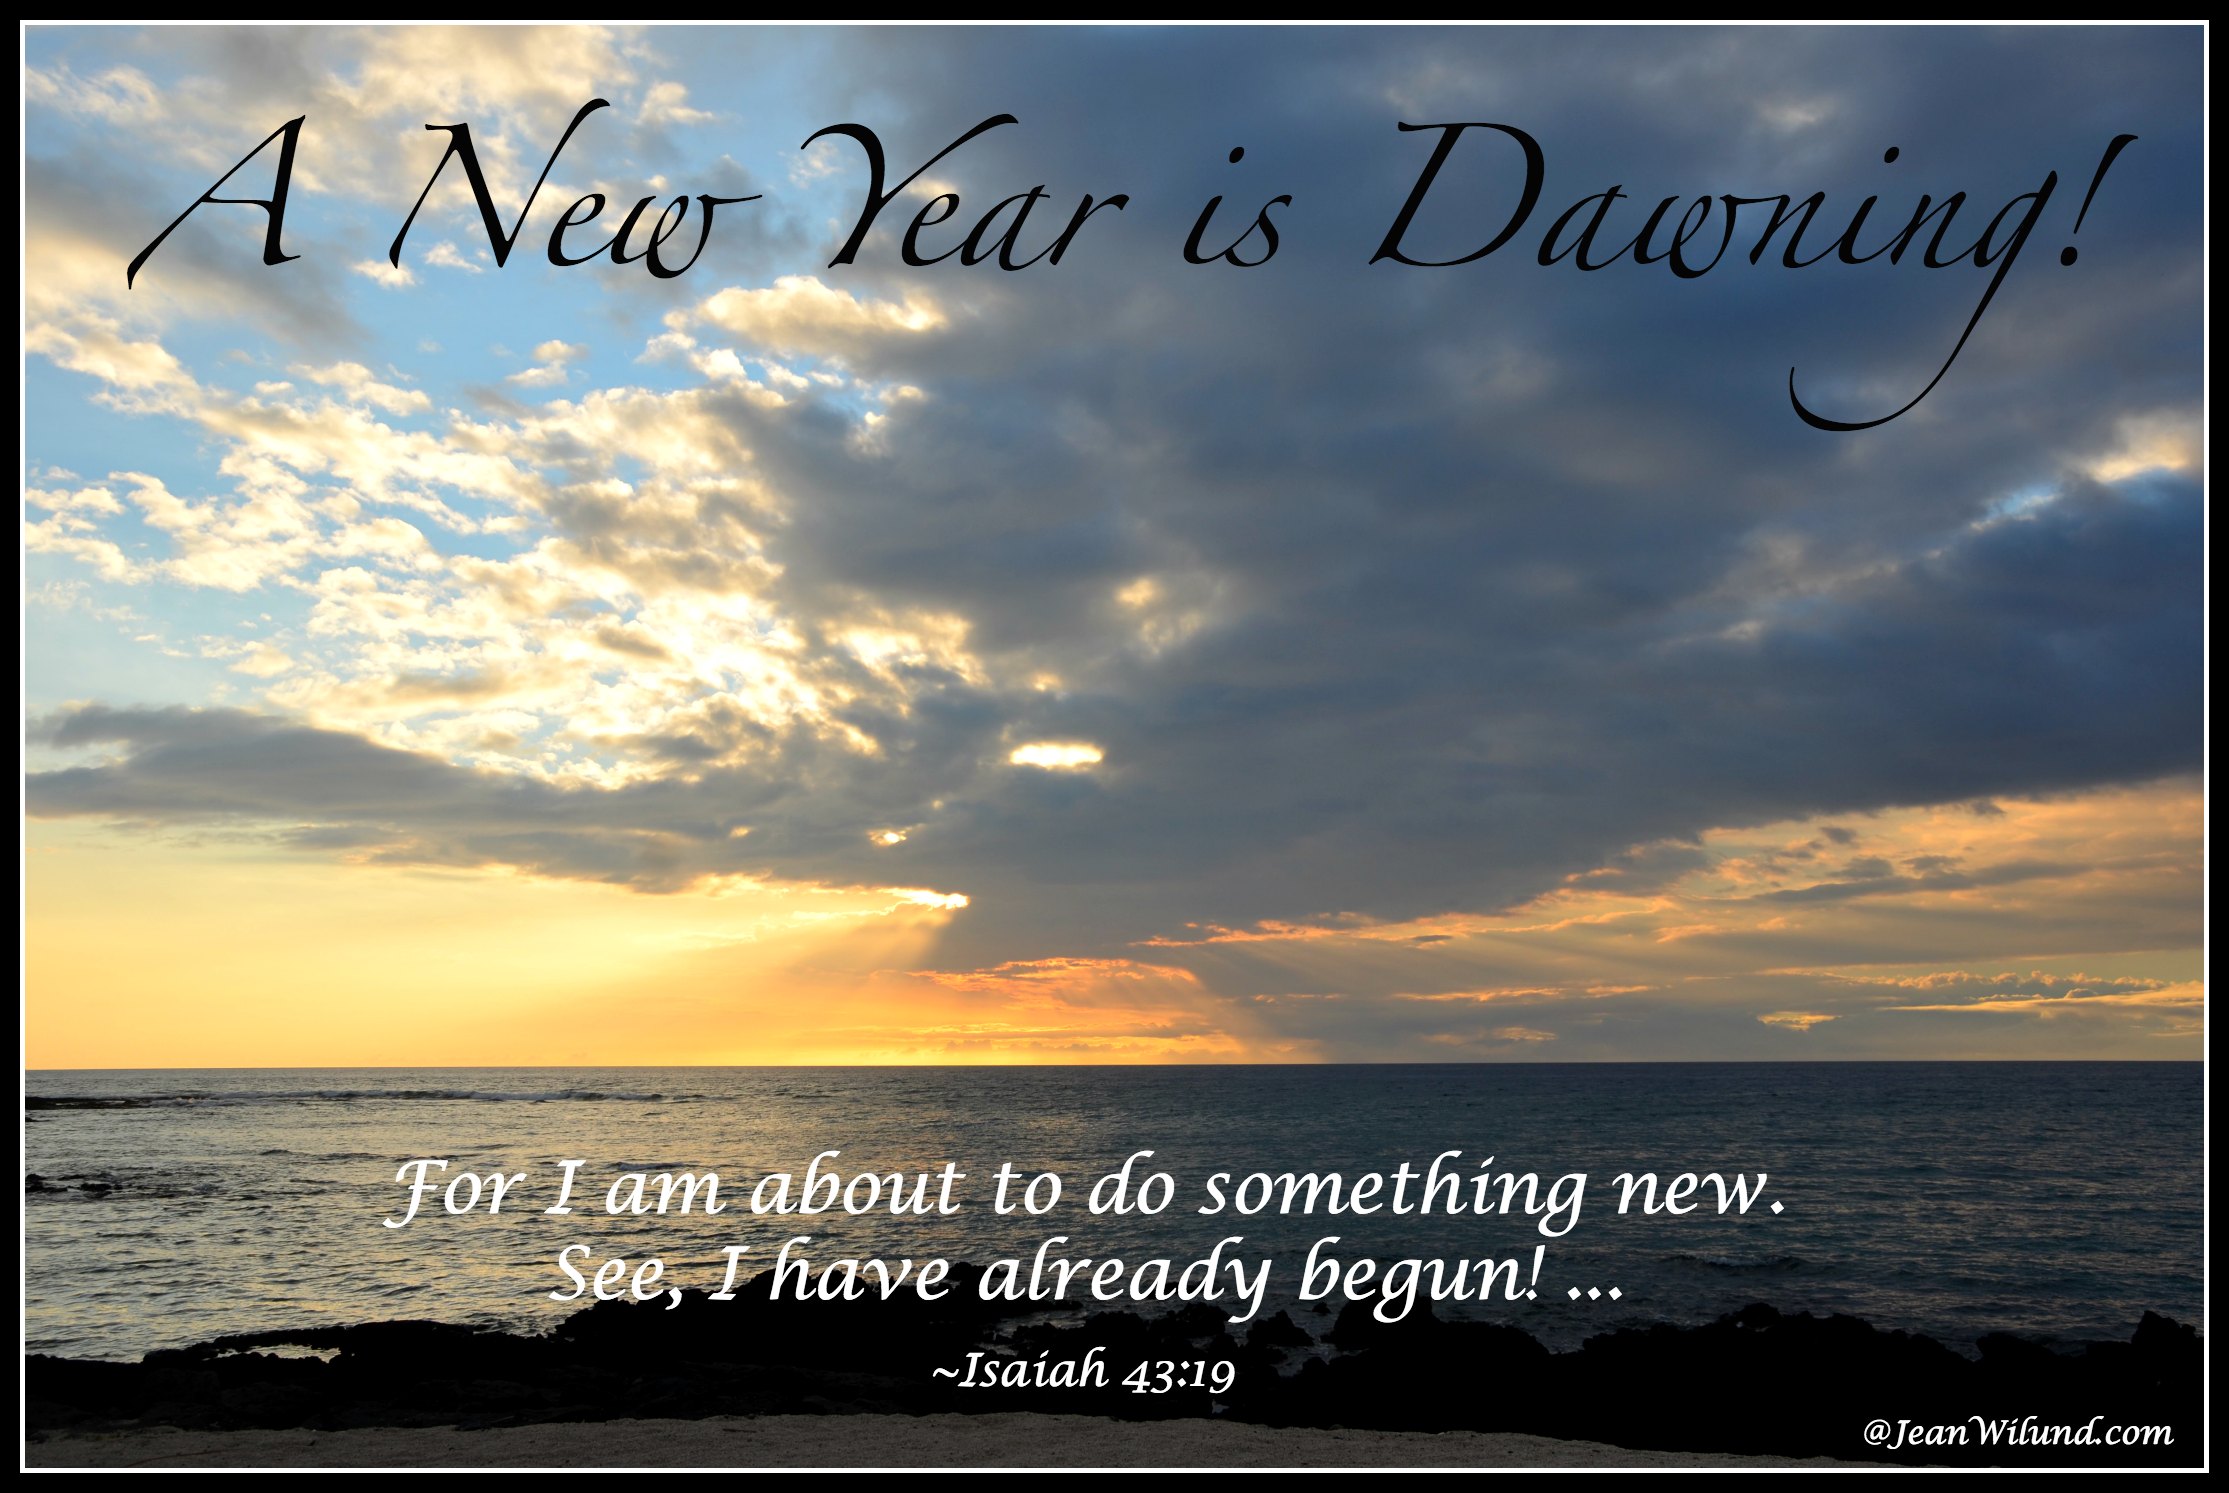 Click to view: A New Year is Dawning - Isaiah 43 via www.jeanwilund.com